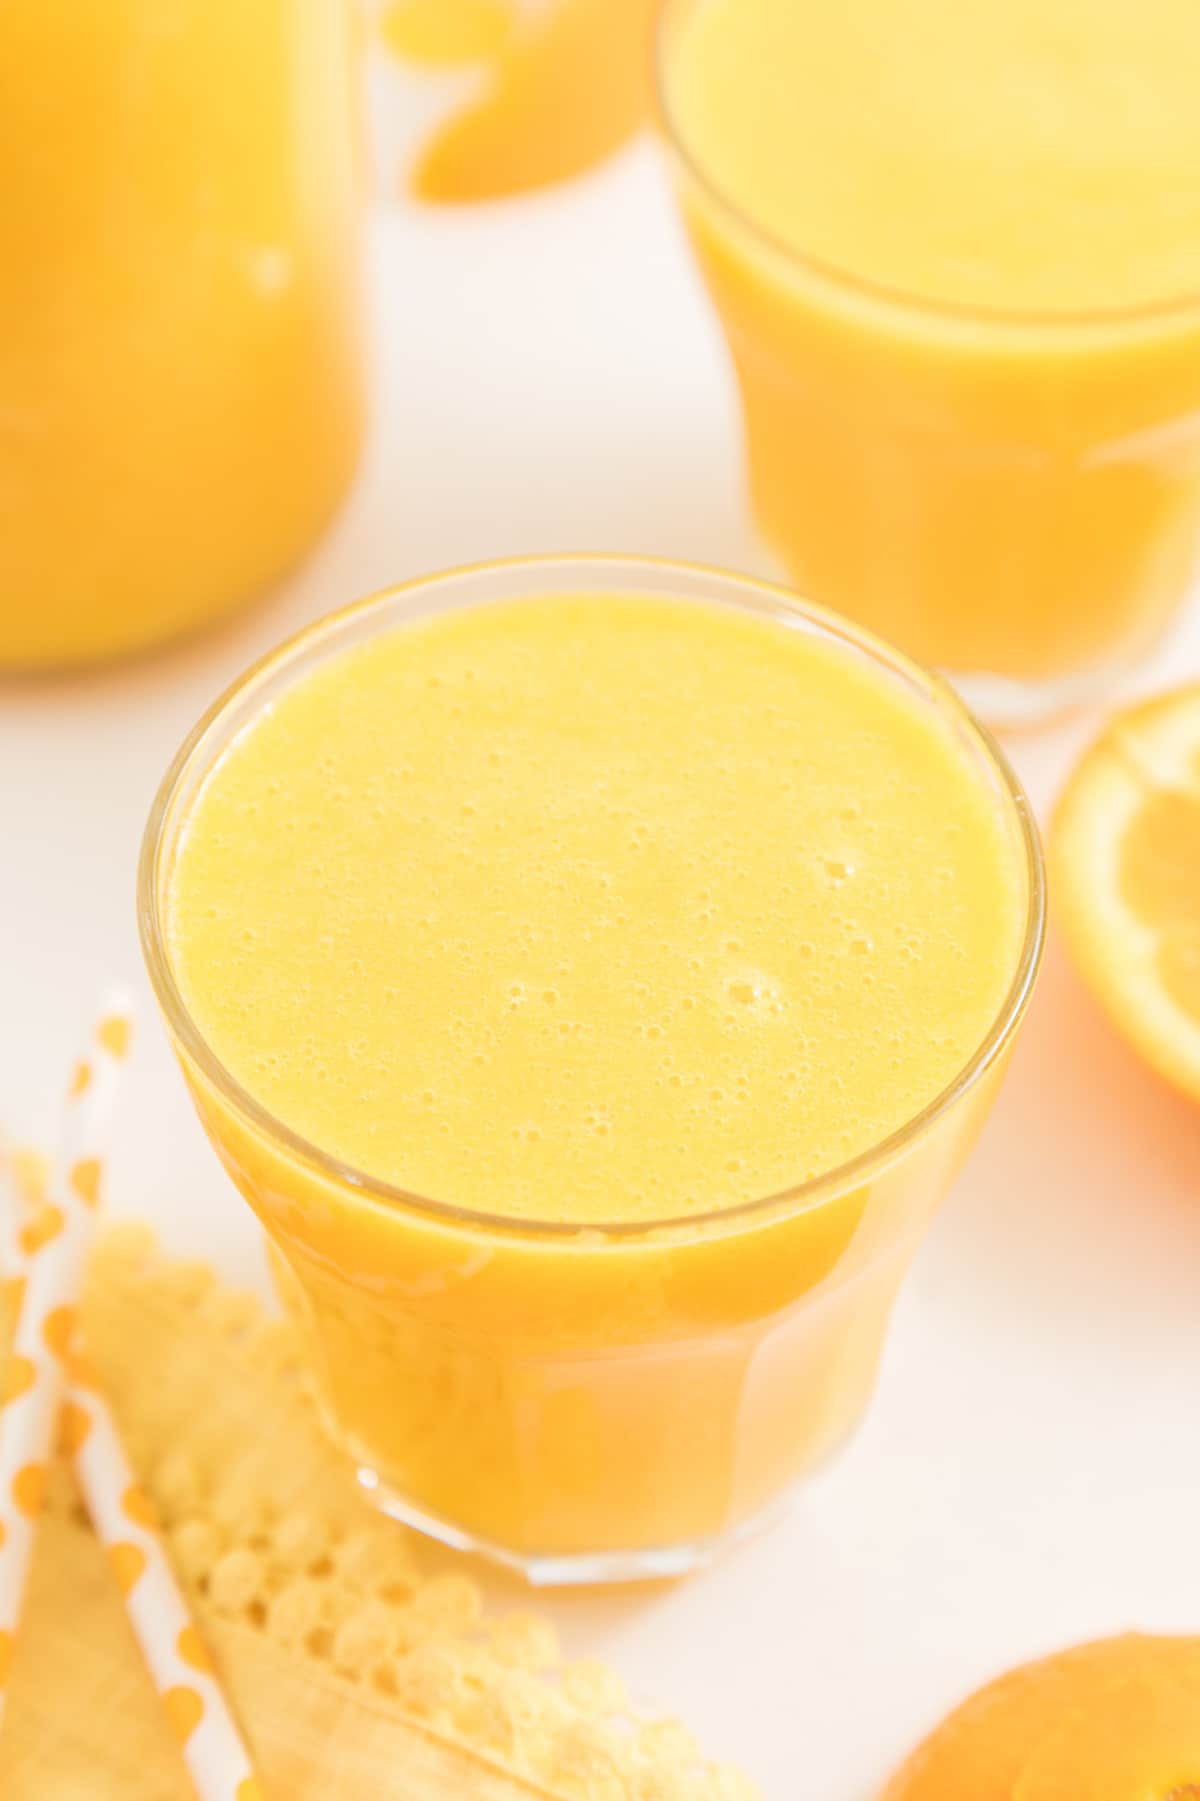 blended orange juice served in low glass on table with fresh oranges.